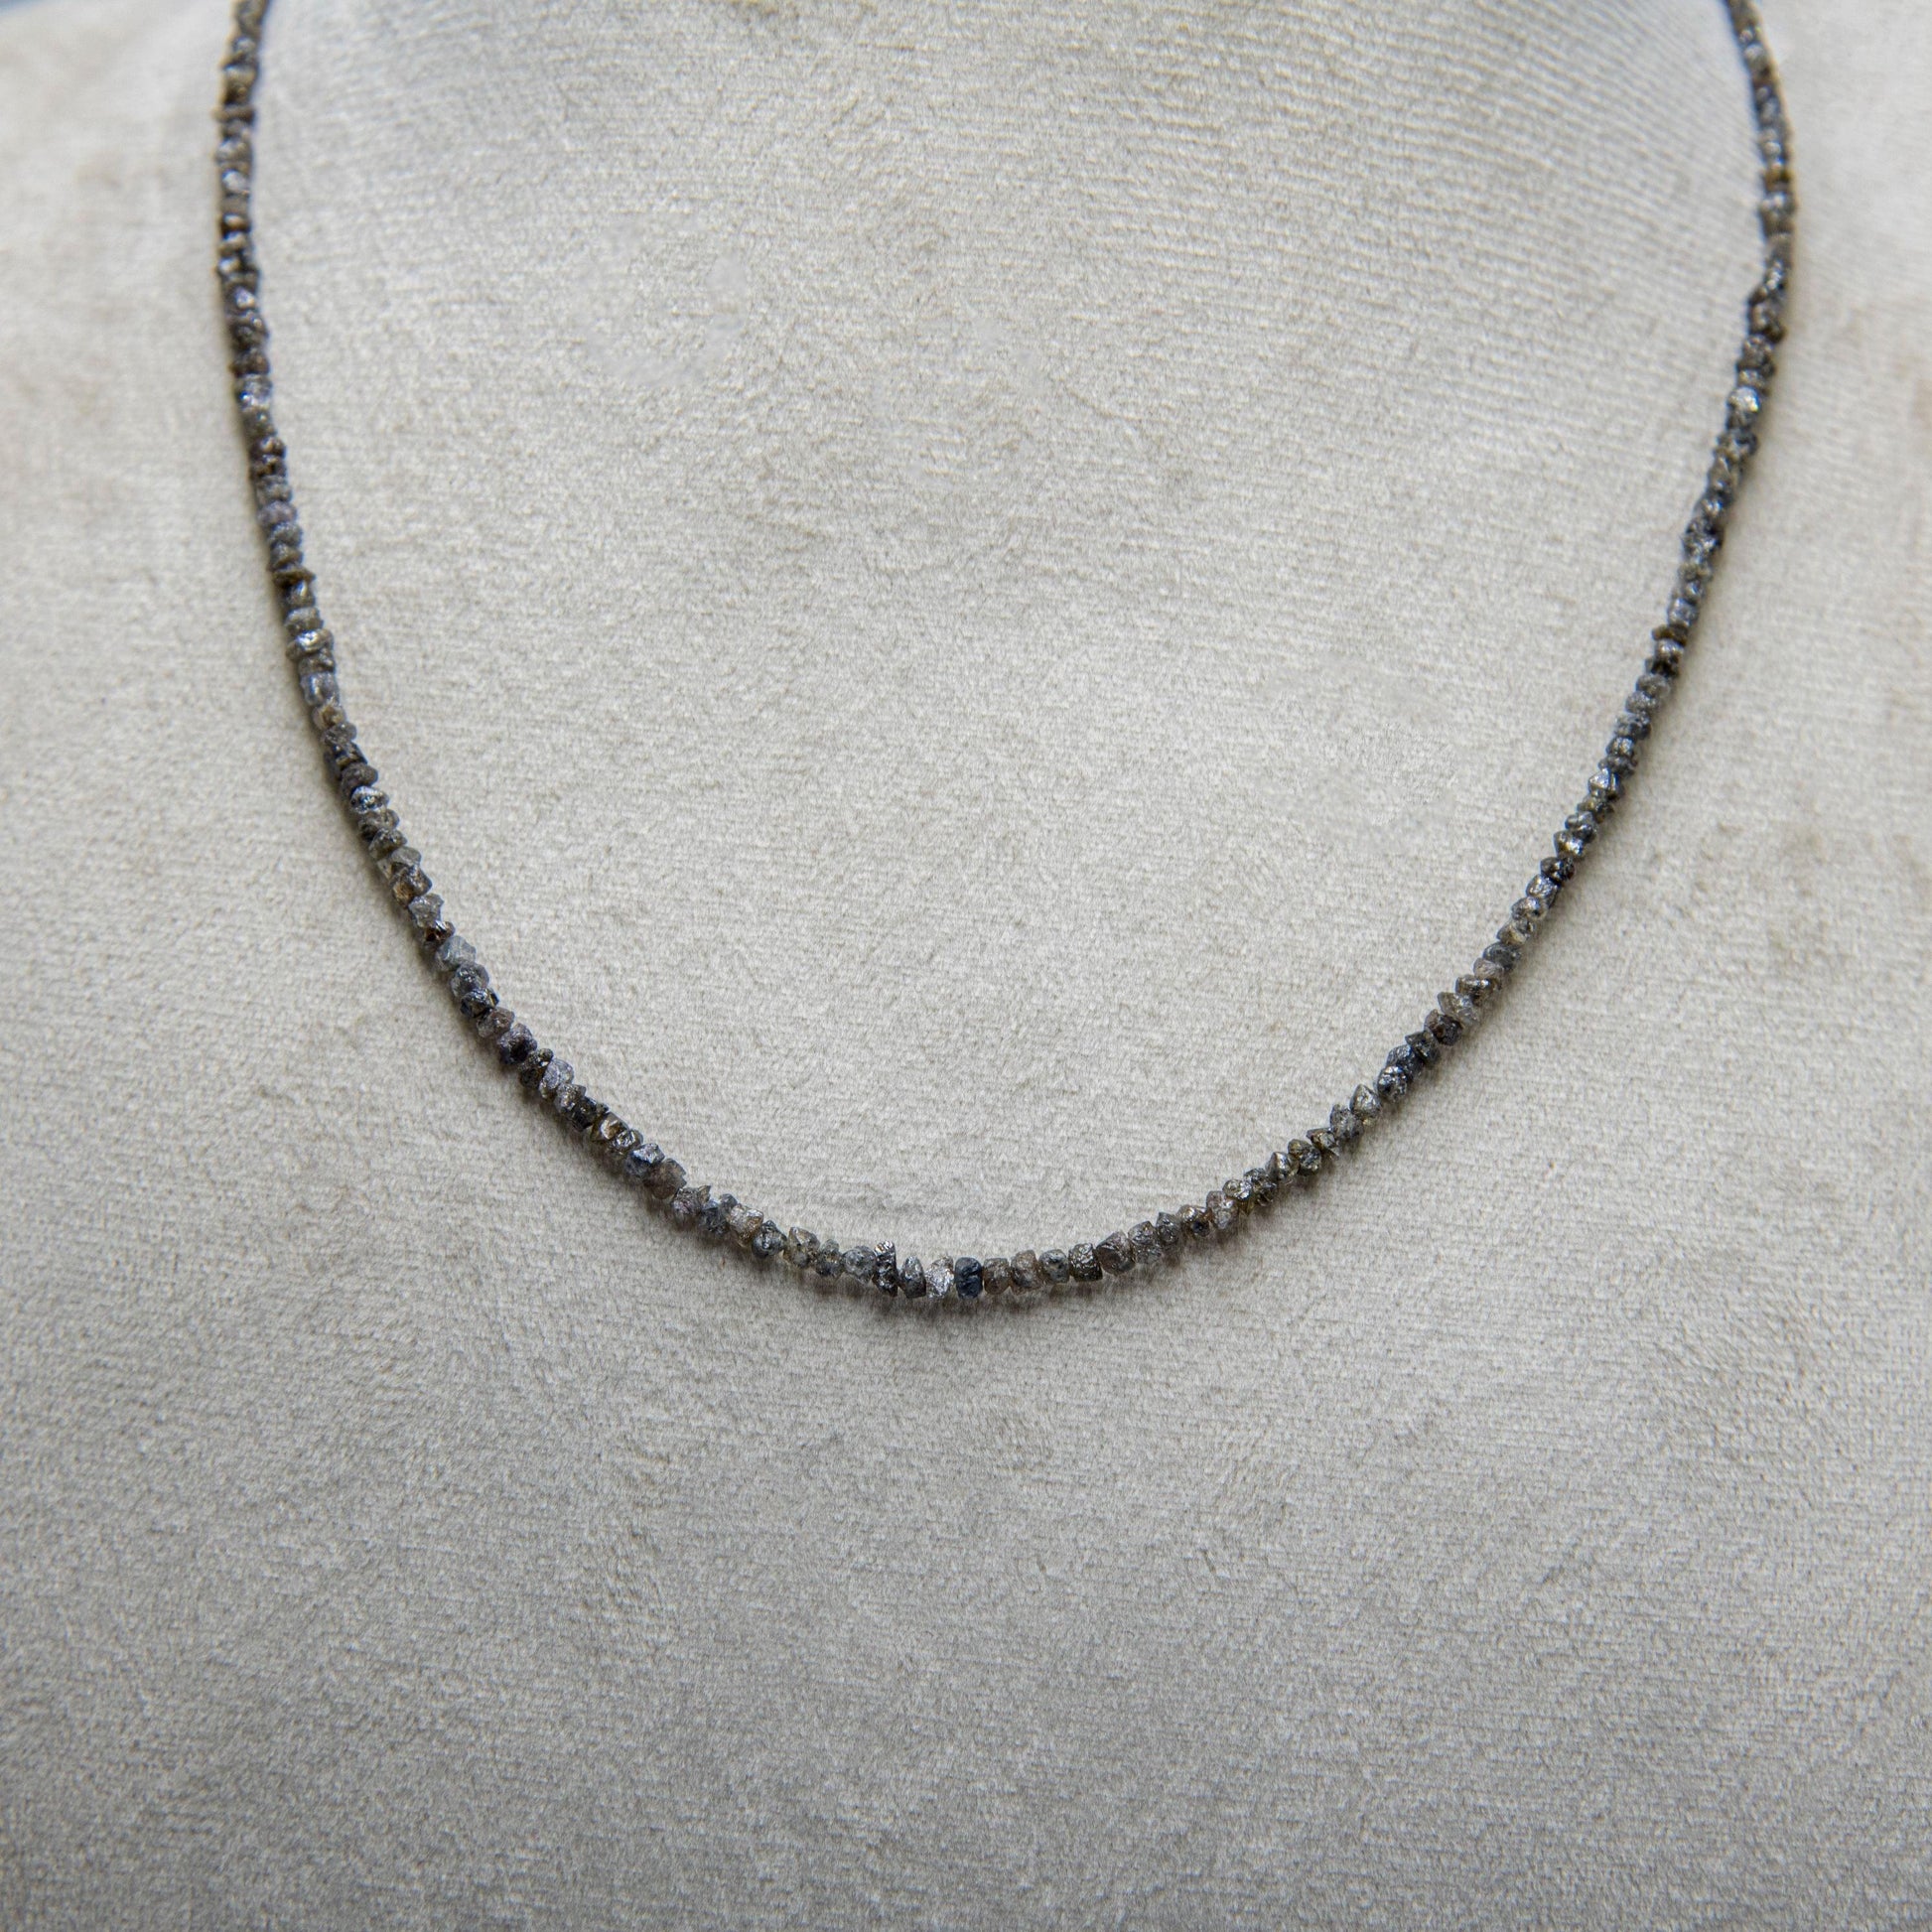 Big Brown Rough Diamond Bead Necklace with Silver Clasp - DeKulture DKW-1382-Small-BNK